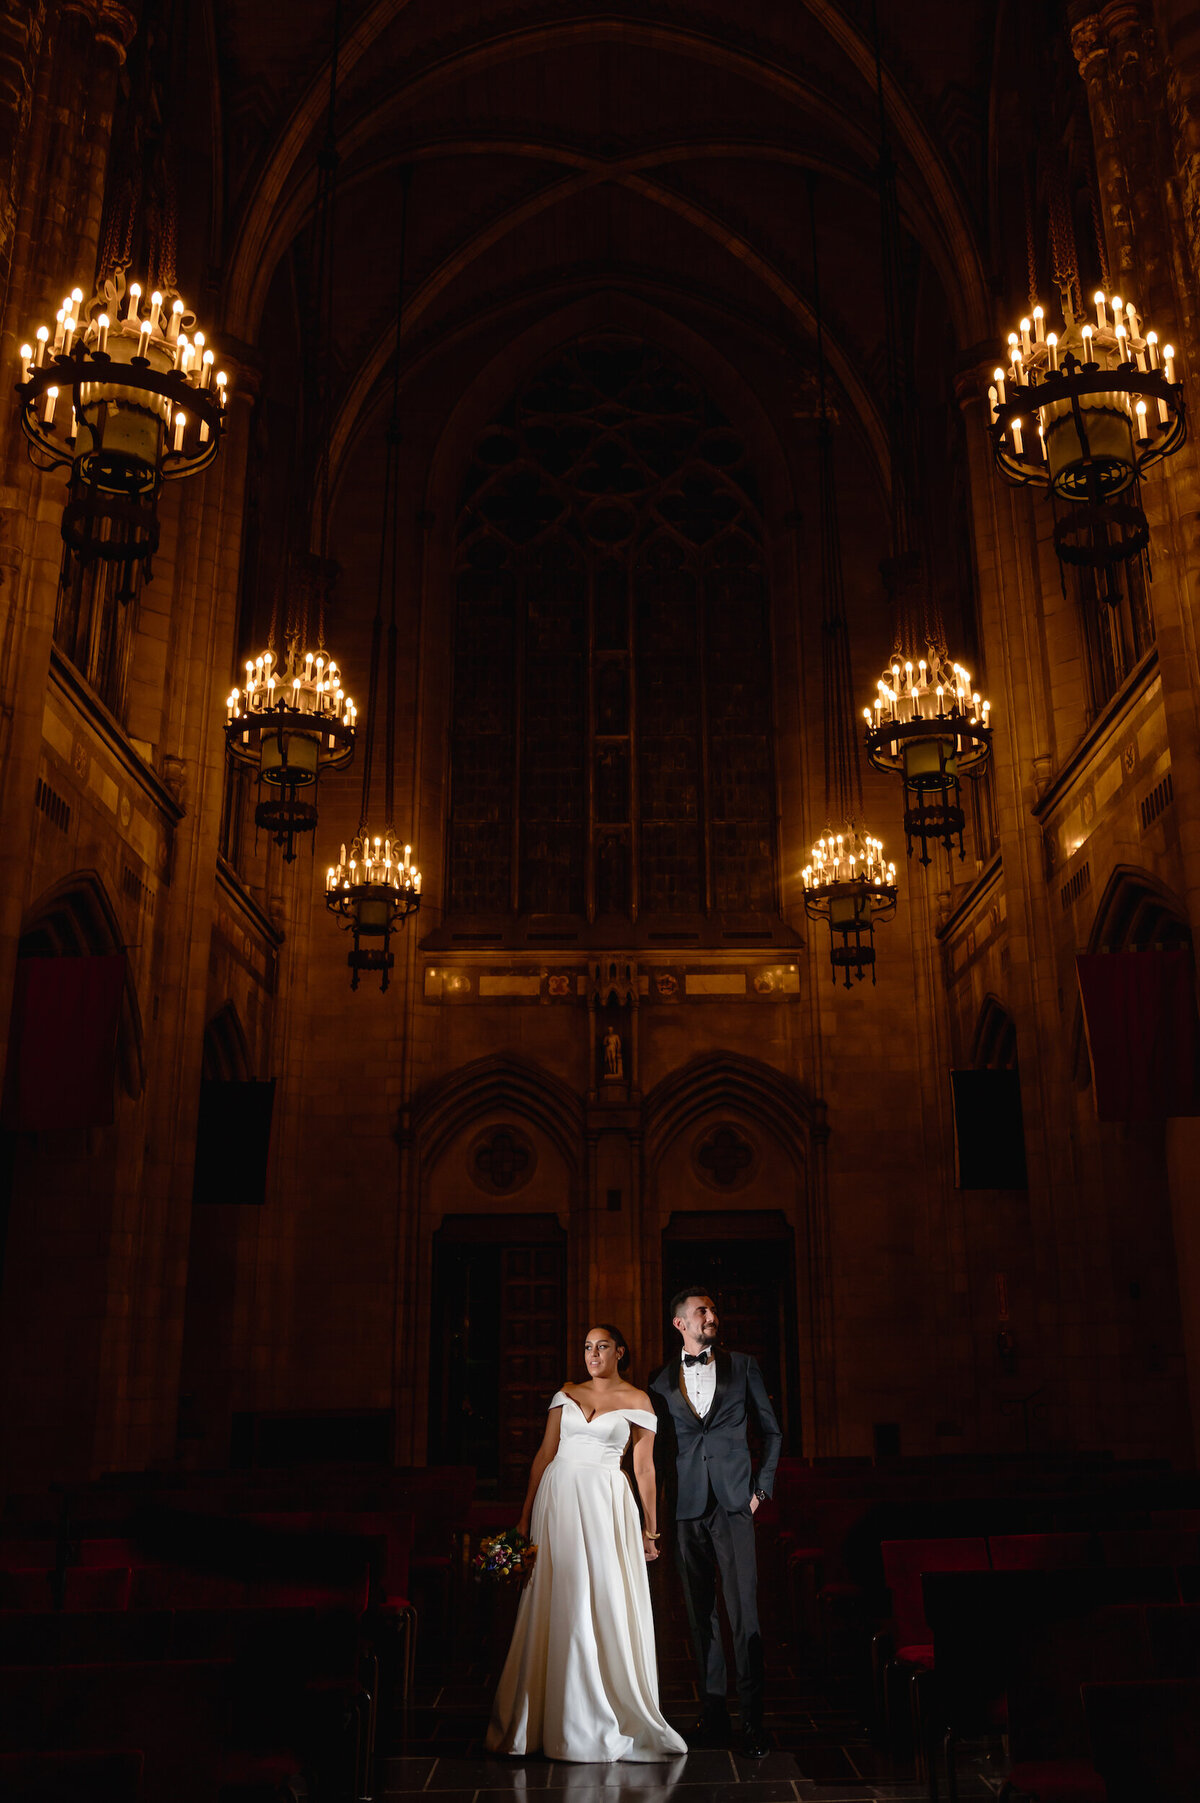 Bride and groom church wedding in Chicago